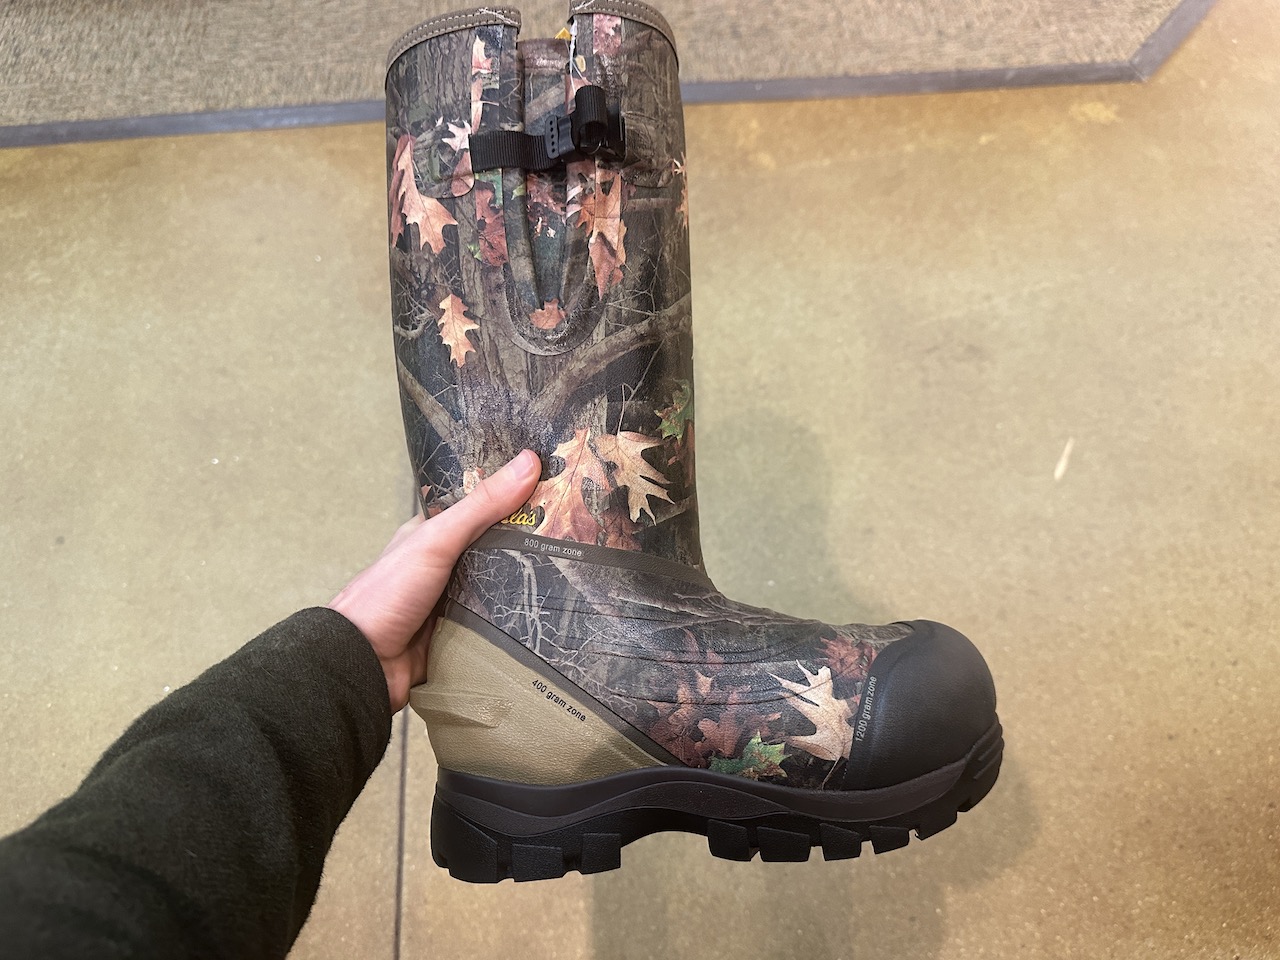 Cabela's Zoned Comfort Trac 1200g Insulated Ice Fishing Boots. Similar to 2000g model.